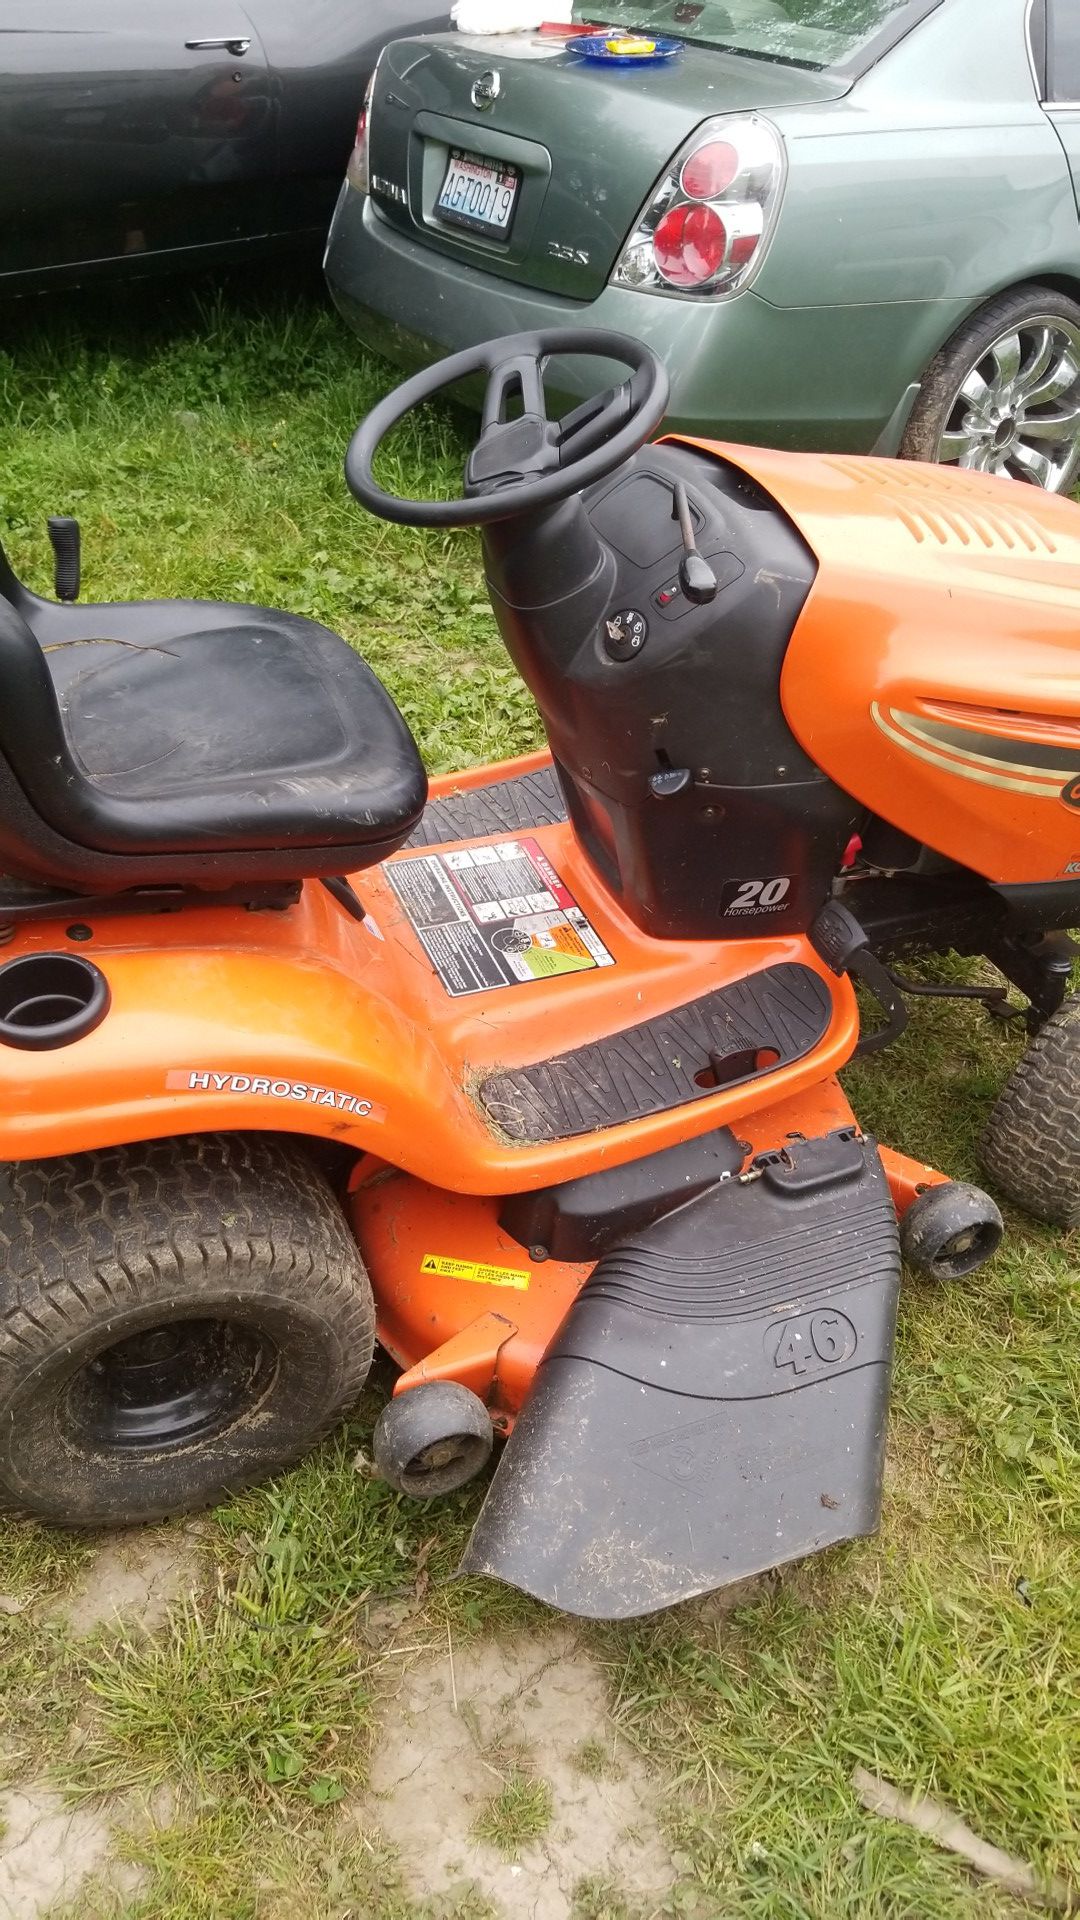 2011 Ariens 46 in 20 HP Riding Lawn Tractor Model 960460023